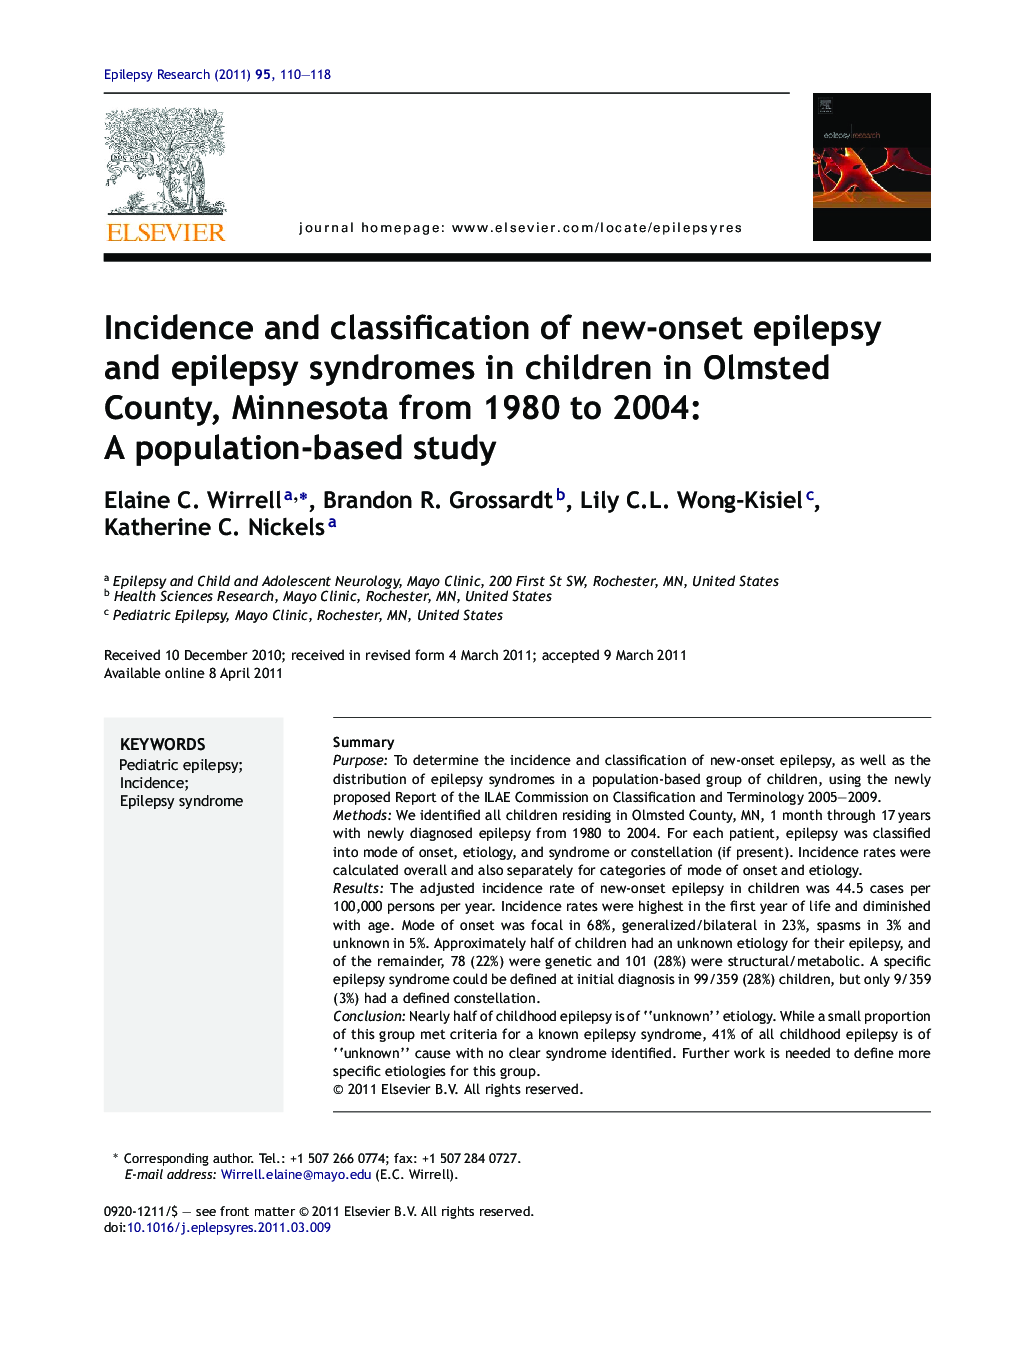 Incidence and classification of new-onset epilepsy and epilepsy syndromes in children in Olmsted County, Minnesota from 1980 to 2004: A population-based study